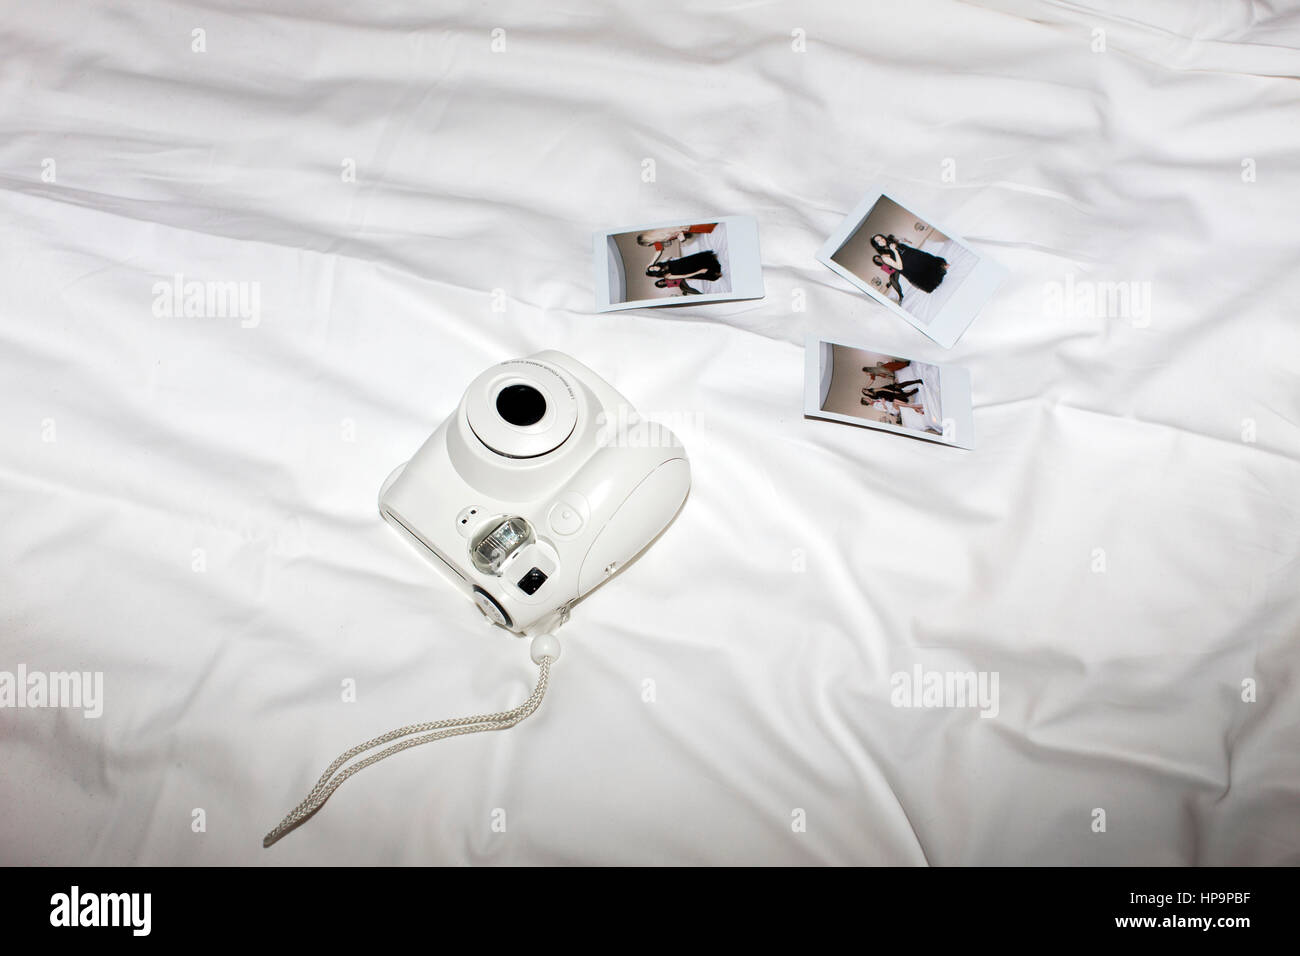 Pop instant camera and several printed photographs Stock Photo